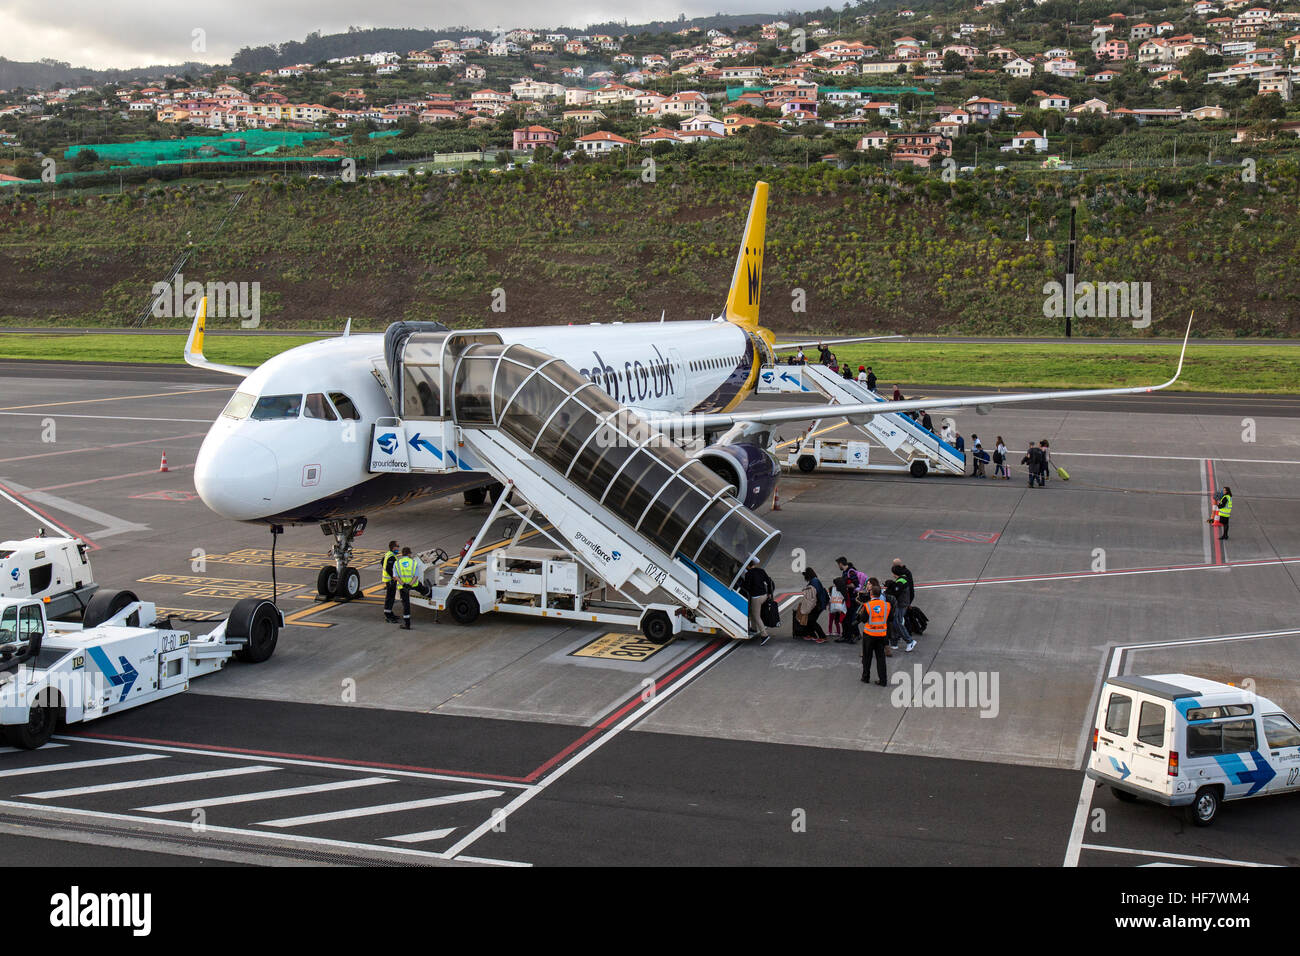 Monarch Airlines A321 Airbus G-ZBAD at Funchal Airport on the island of Madeira. Passengers boarding. Stock Photo